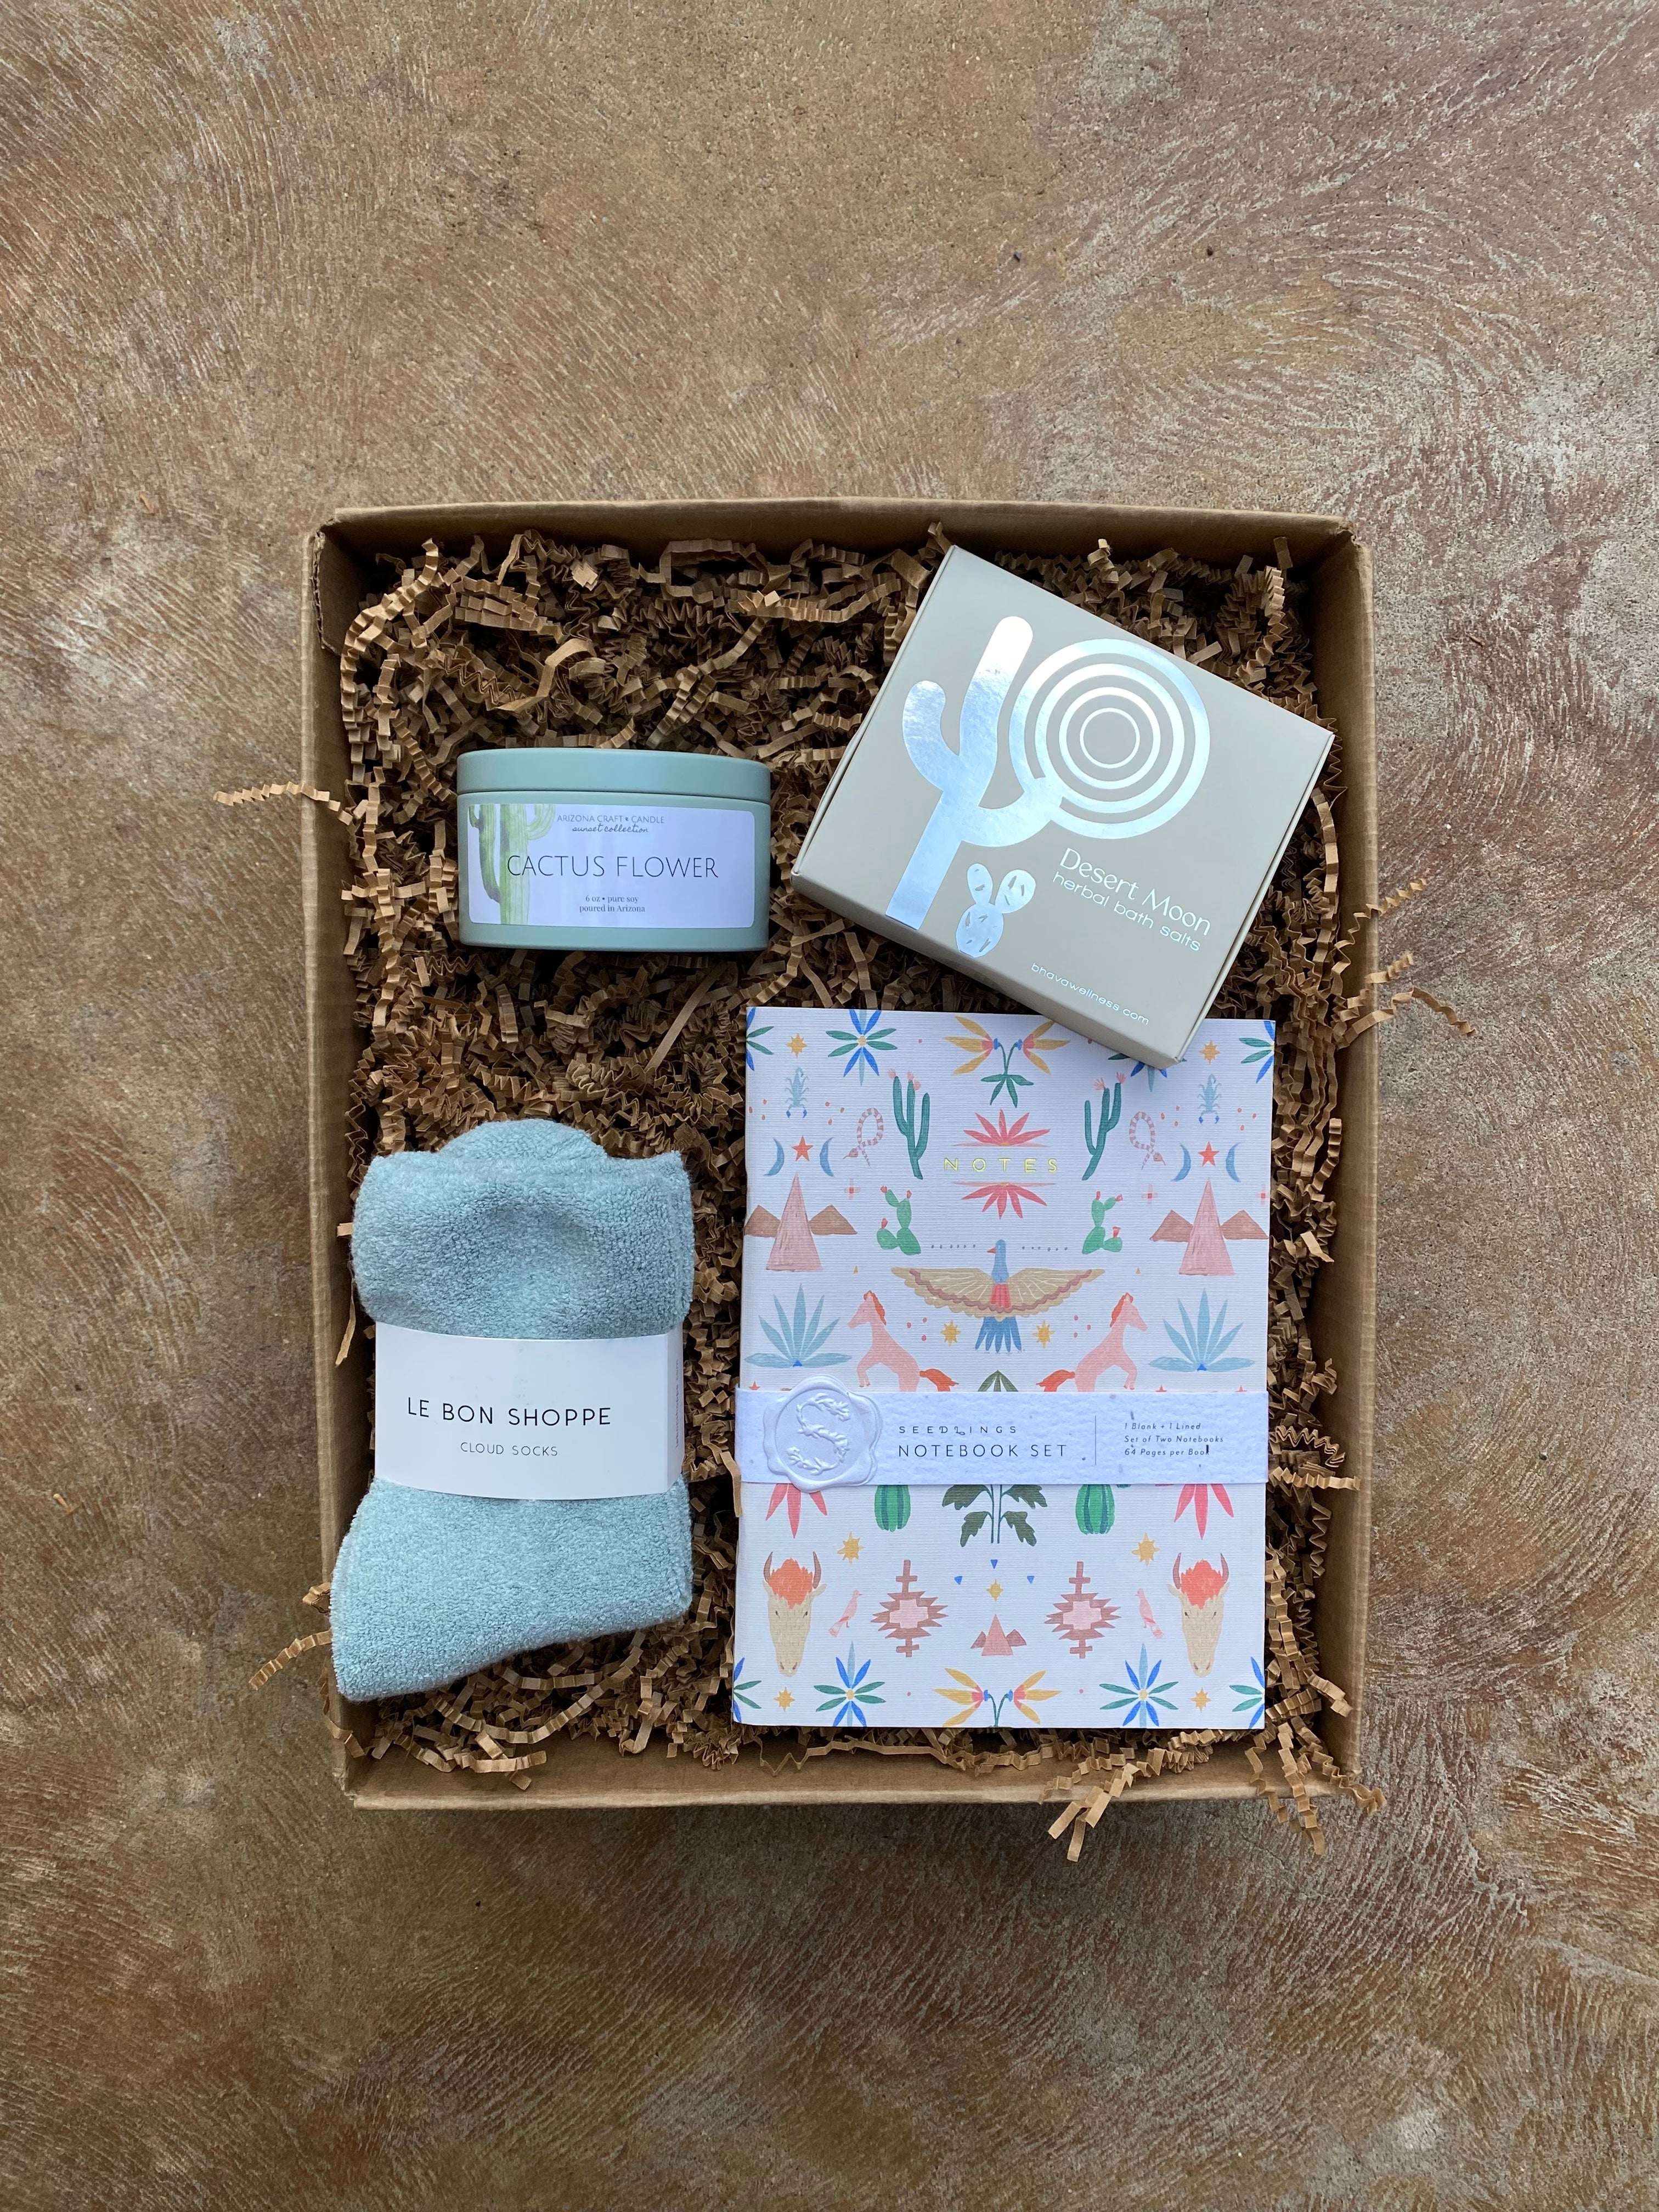 For Healing | Build Your Own Gift Box